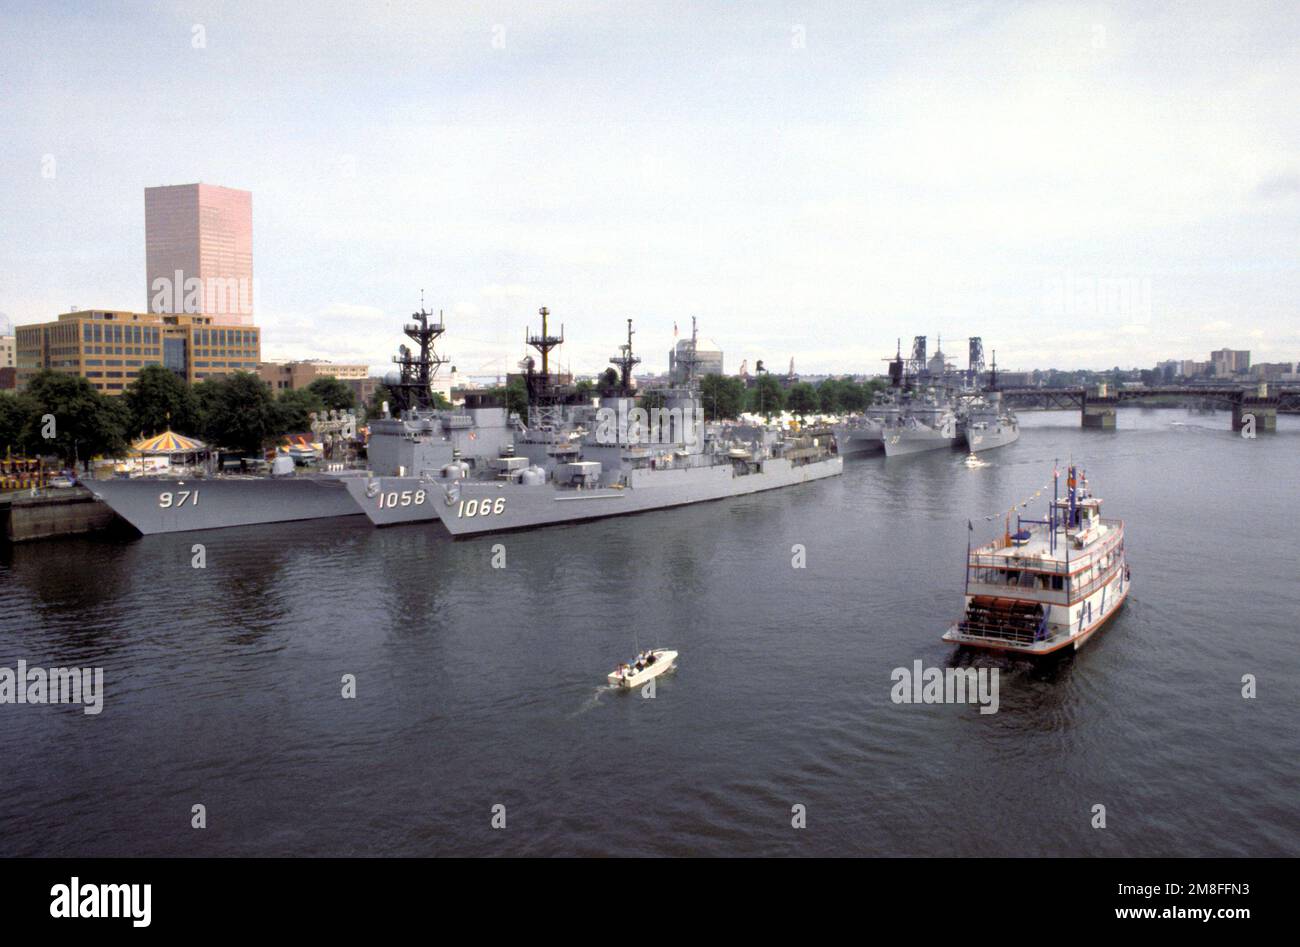 Pacific Fleet ships tied up at a dock during Portland's annual Rose Festival include, left, back to front, the destroyer USS DAVID R. RAY (DD-971), the frigates USS MEYERKORD (FF-1058) and USS MARVIN SHIELDS (FF-1066); right, back to front, the guided missile destroyers USS SEMMES (DDG-18) and USS PARSONS (DDG-33) and the frigate USS BARBEY (FF-1088). Base: Portland State: Oregon(OR) Country: United States Of America (USA) Stock Photo